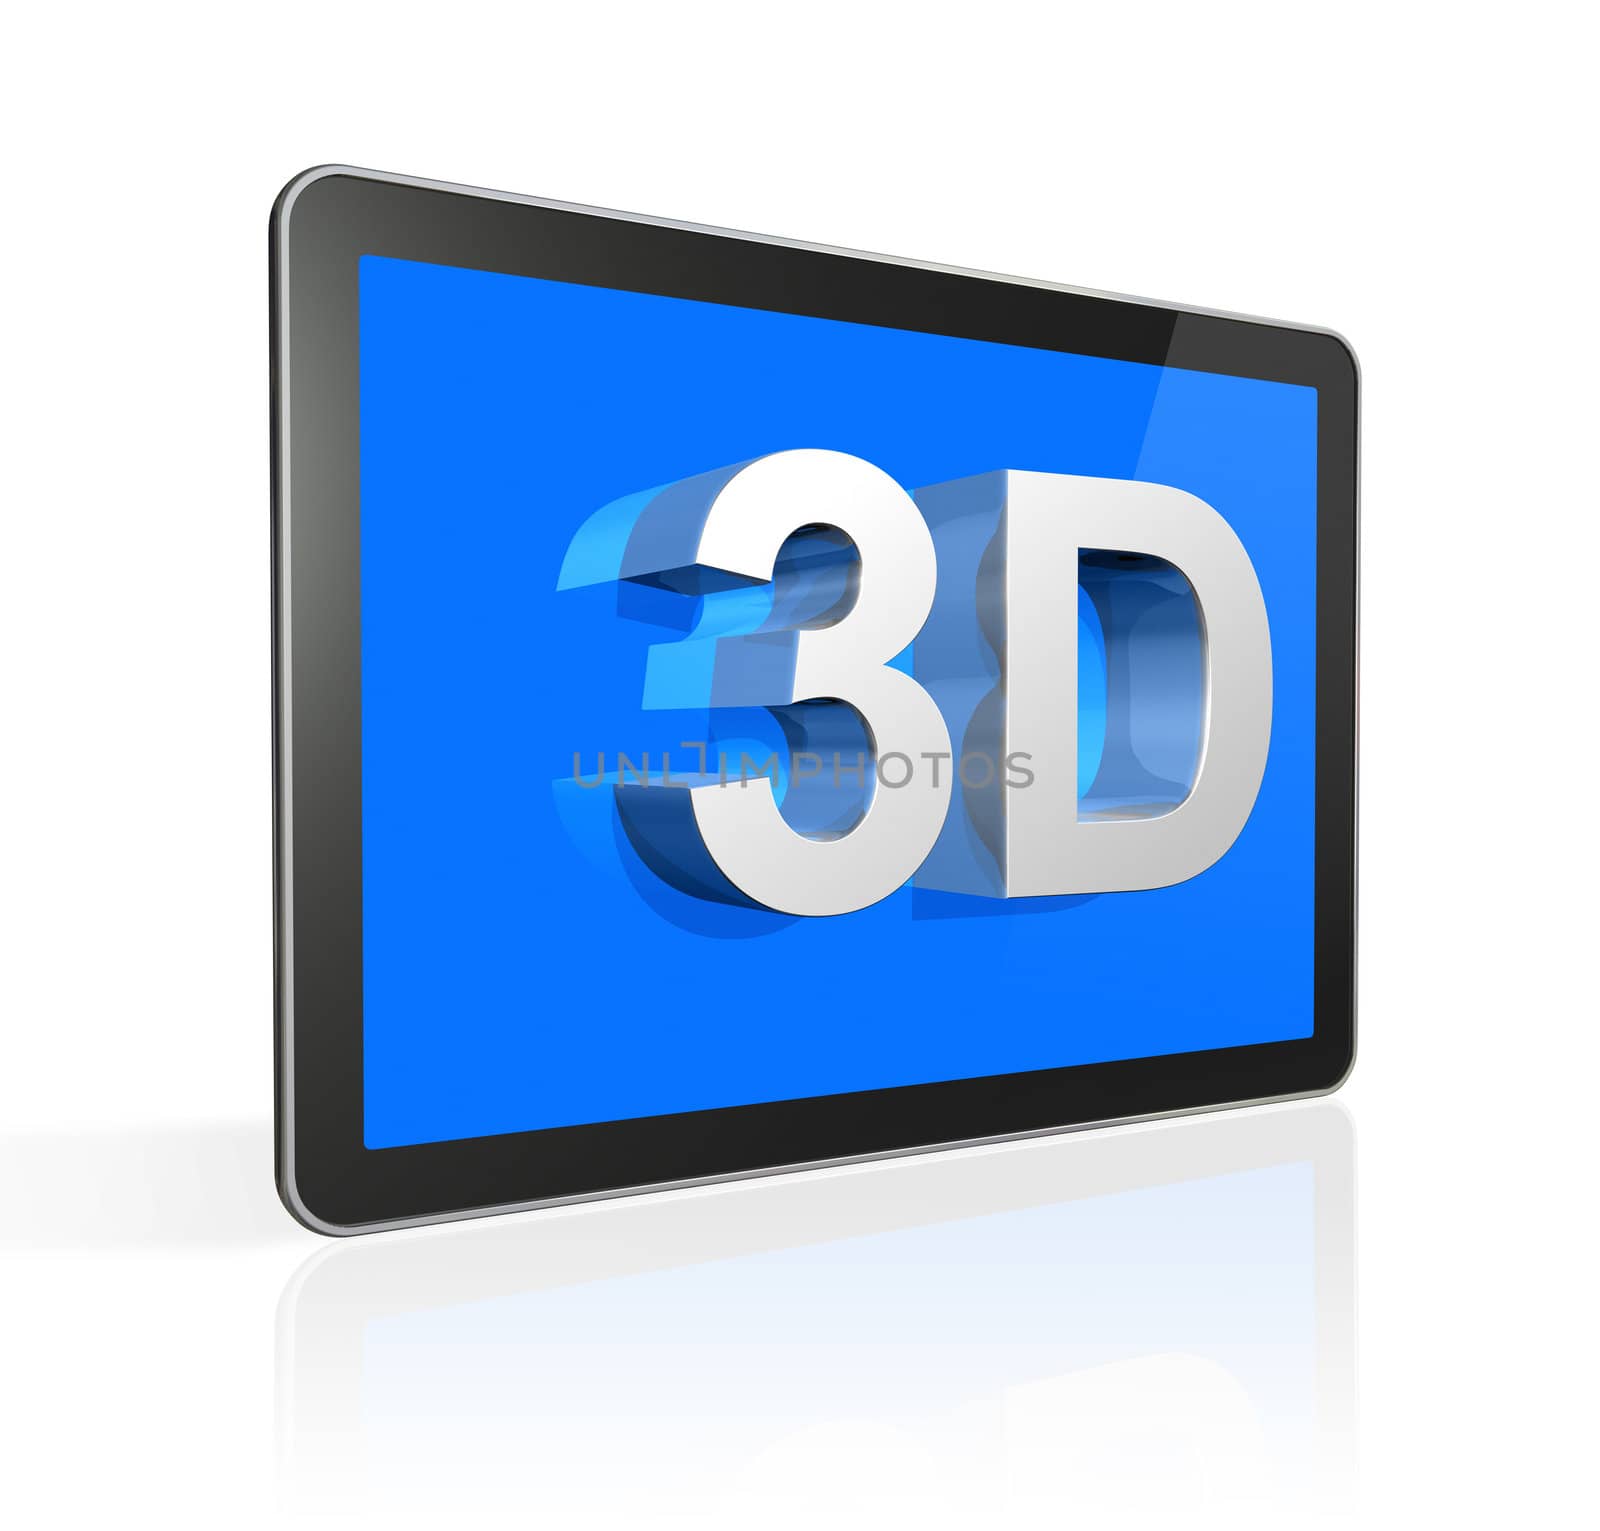 3D television screen with 3D text by daboost